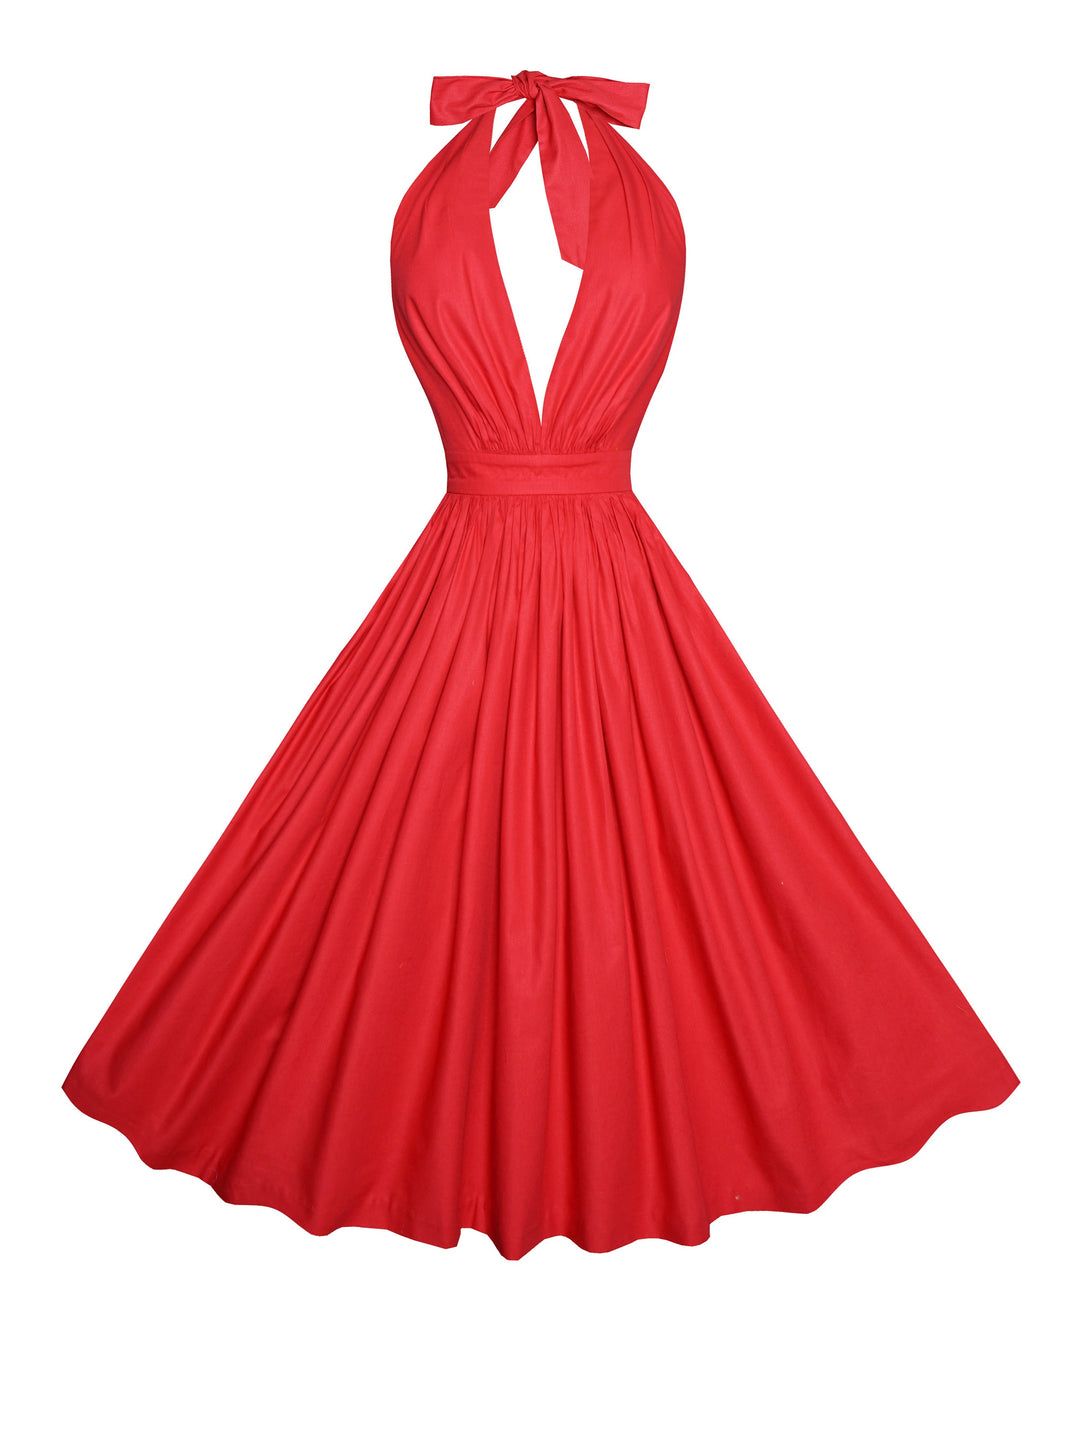 MTO - Charlotte Dress in Cardinal Red Cotton